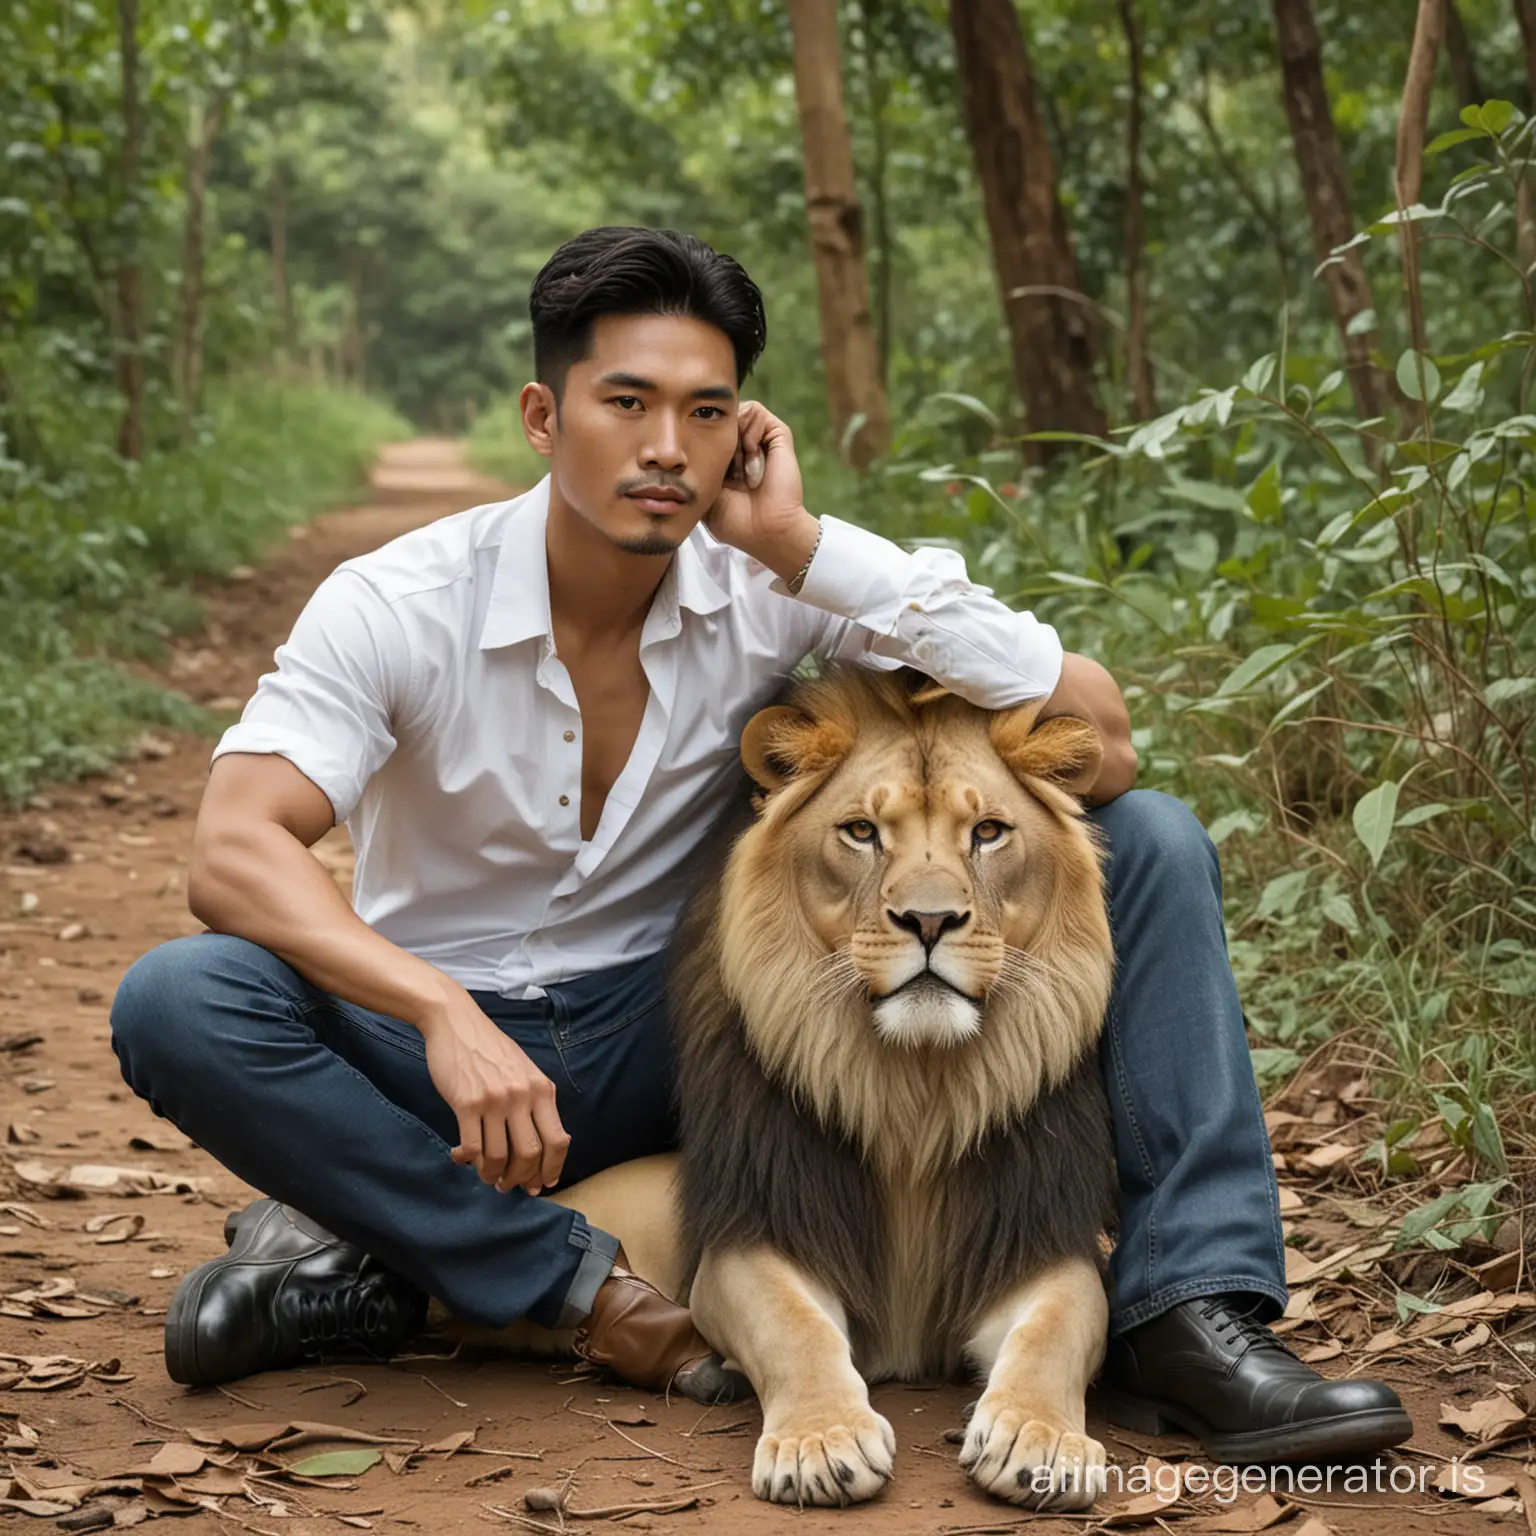 Image of Handsome Korean Indonesian Man (37), Hair Combed Back. a lion sitting on the ground together. The man was wearing a black shirt, white undershirt, jeans and leather shoes. The lion seemed still and the man was holding the lion. They are in the forest.